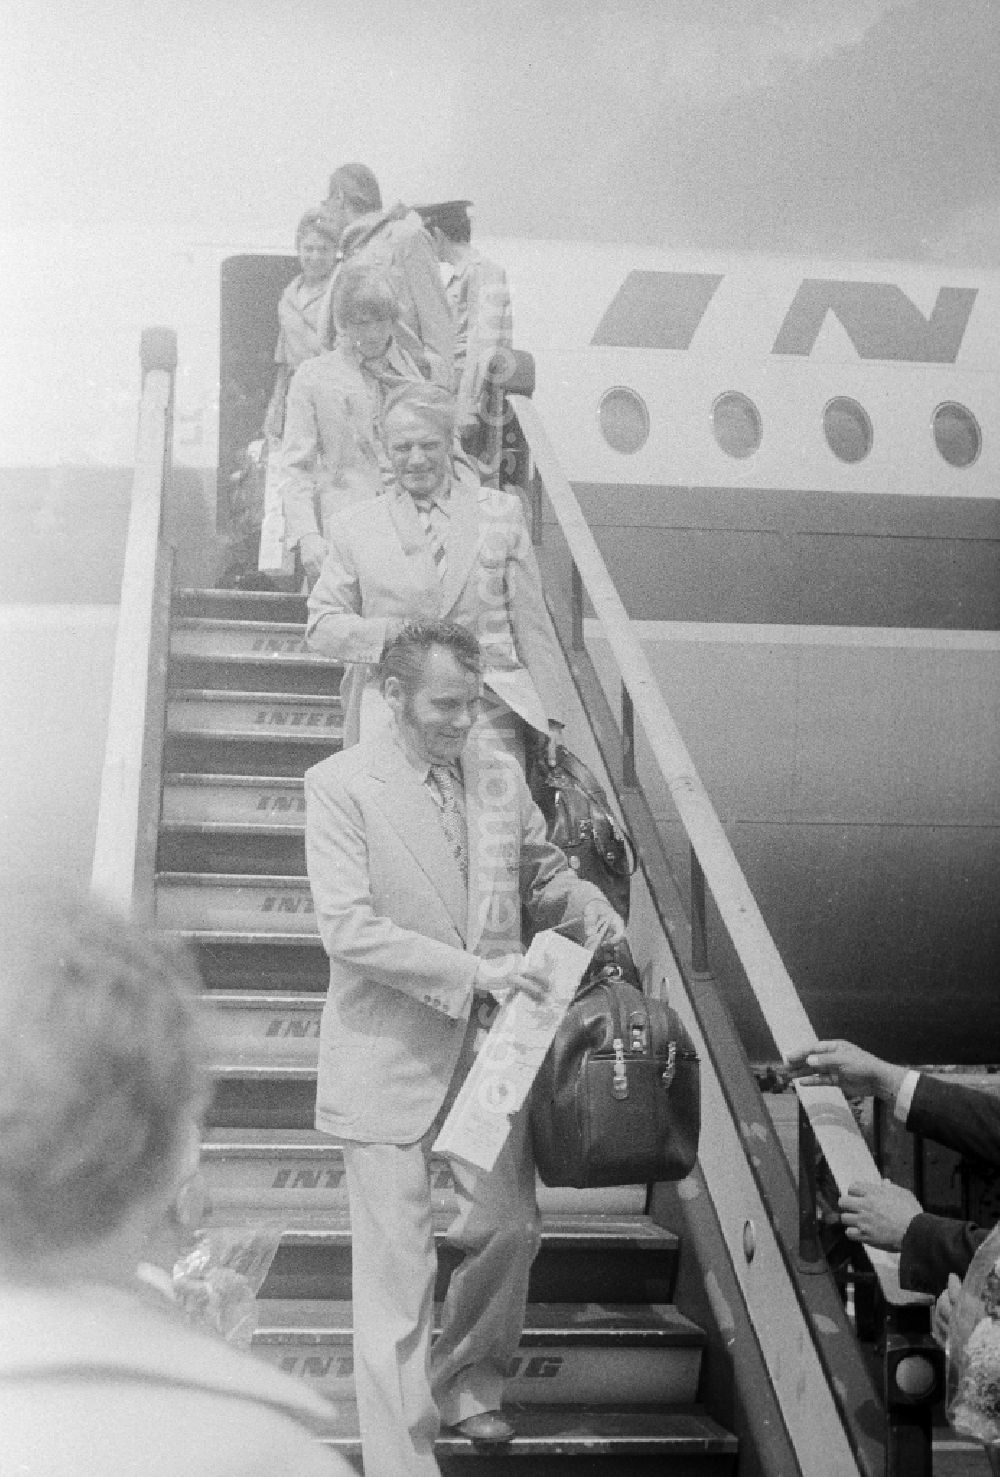 GDR photo archive: Schönefeld - Arrival of the GDR-Olympic team on the area of the airport beauty's field in beauty's field in the federal state Brandenburg in the area of the former GDR, German democratic republic. The GDR took part in the Summer Olympics in 1976 in Montreal with a delegation of more than 28